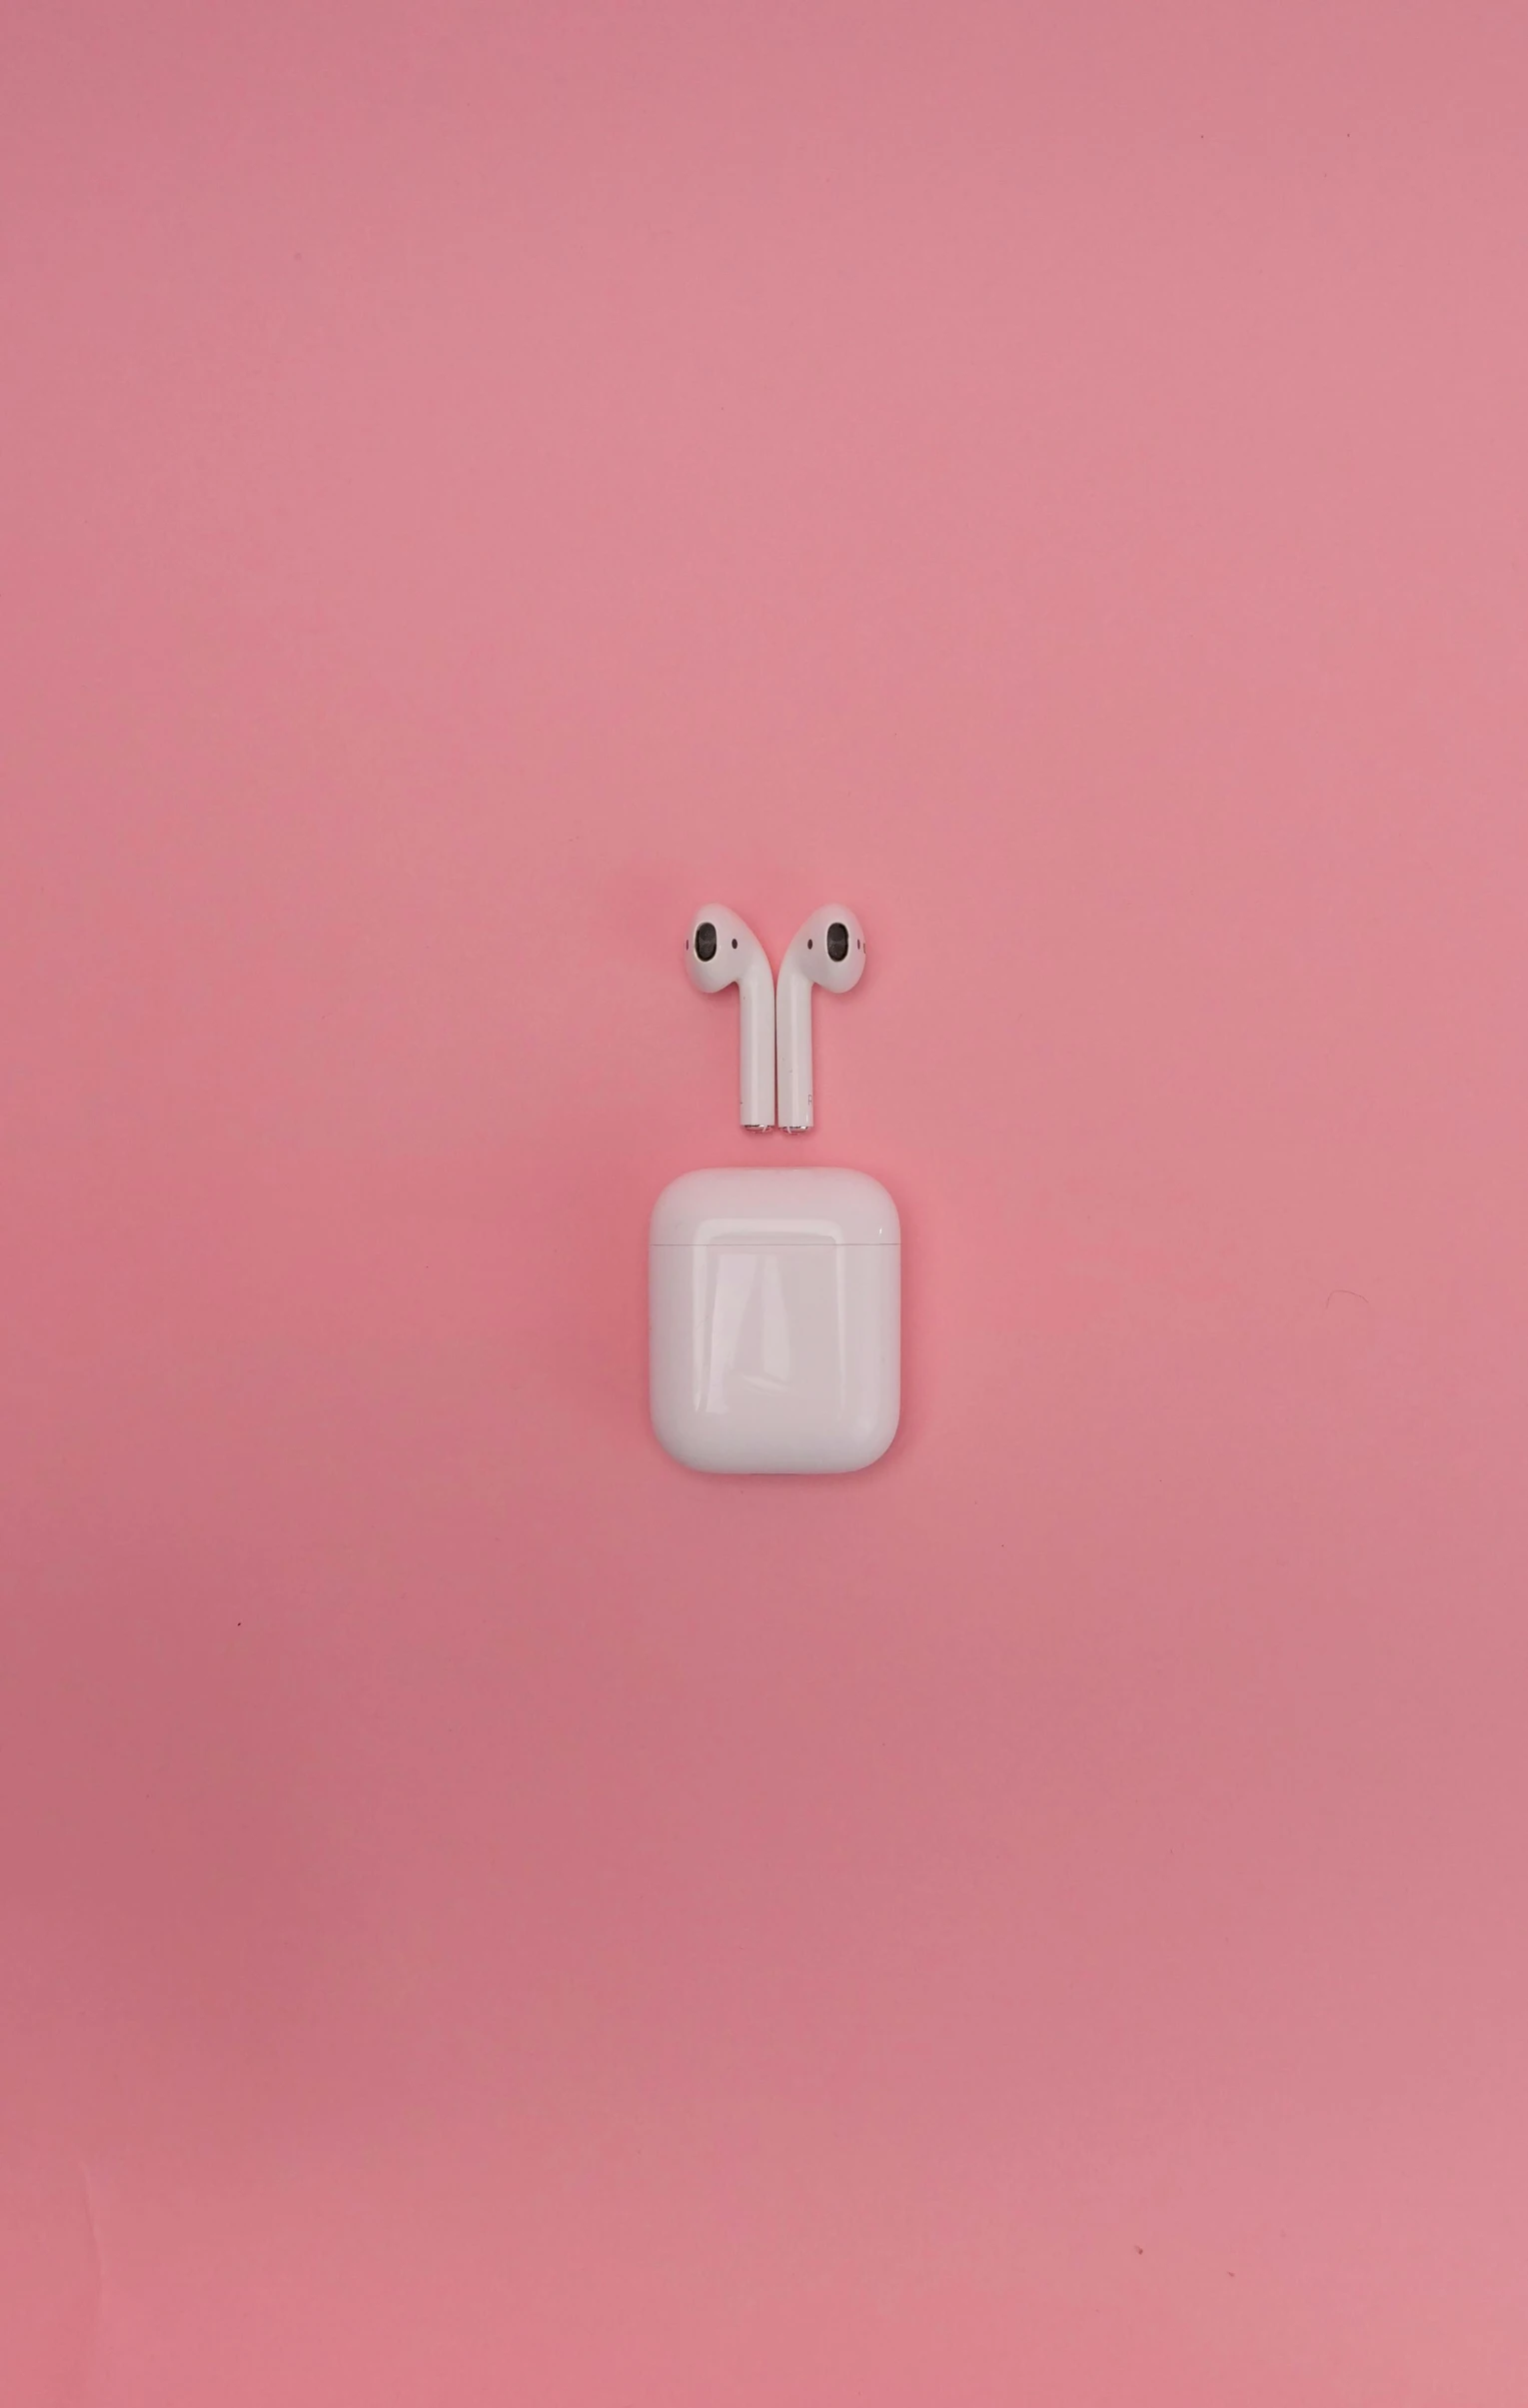 an apple airpods sitting on top of a pink surface, by Elsa Bleda, trending on pexels, 2 5 6 x 2 5 6, drone photo, - ar 1 6 : 9, earring